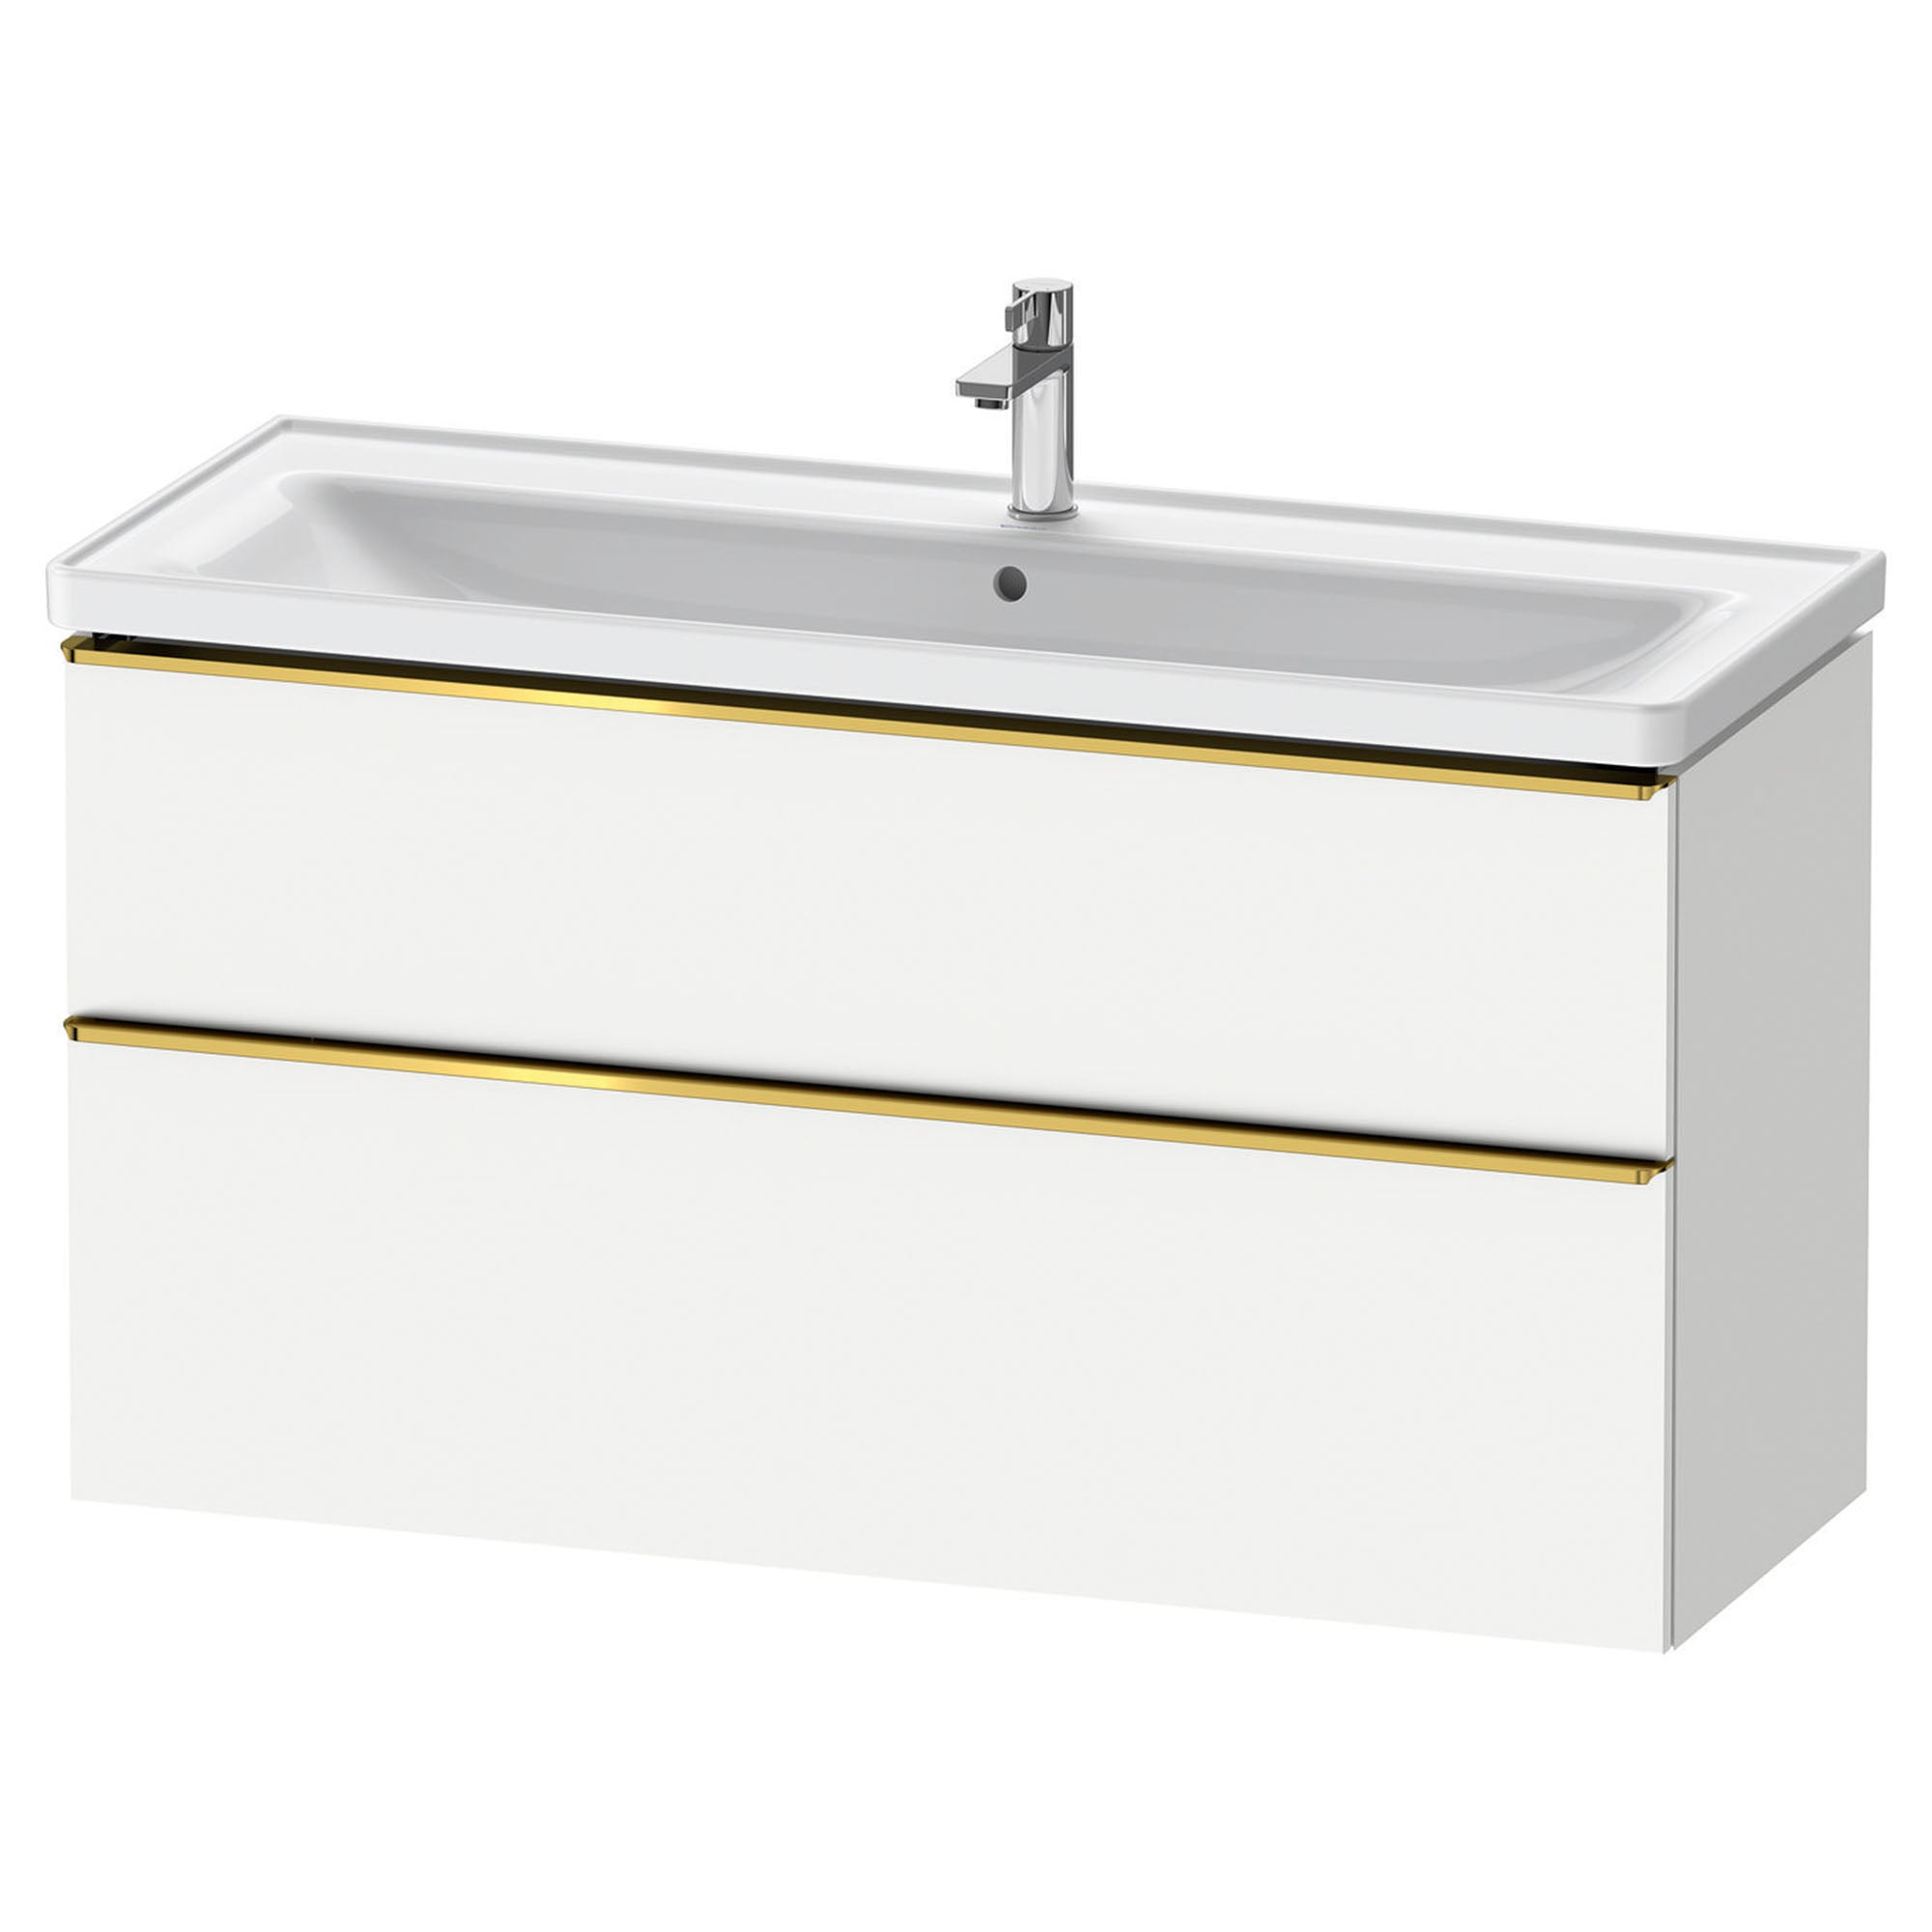 duravit d-neo 1200mm wall mounted vanity unit with d-neo basin matt white gold handles